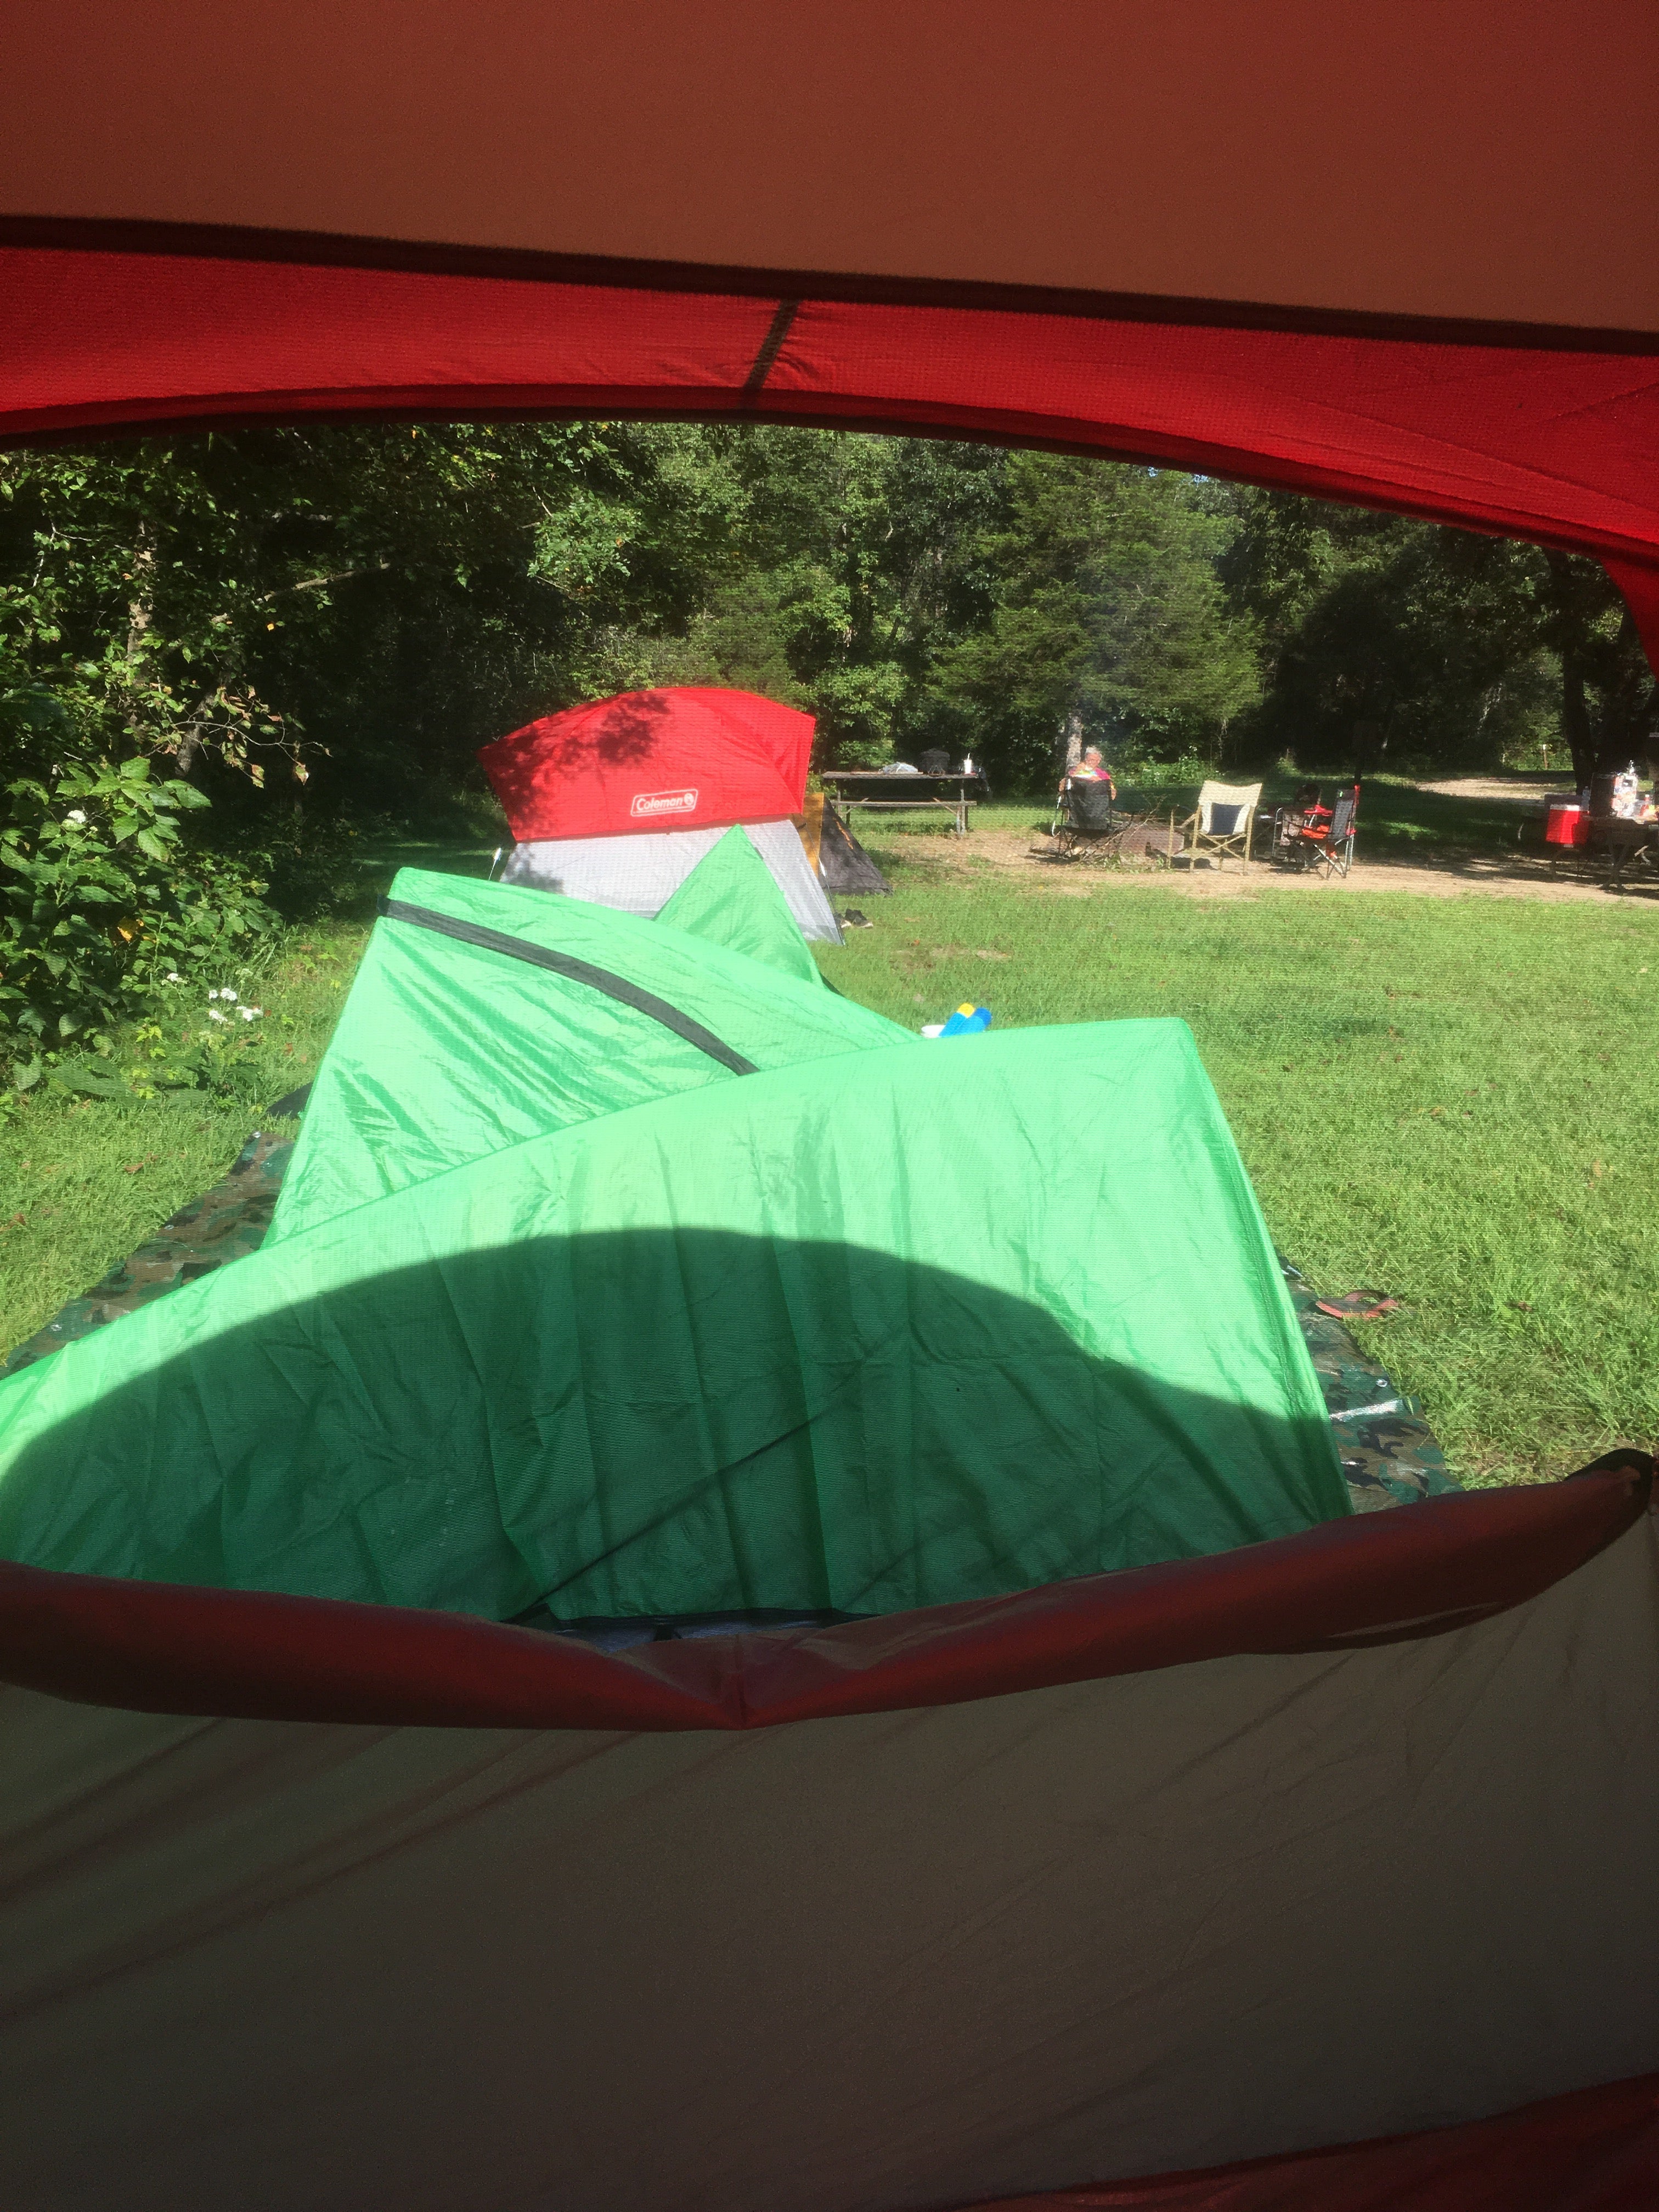 Camper submitted image from Akers Group Campground — Ozark National Scenic Riverway - 3